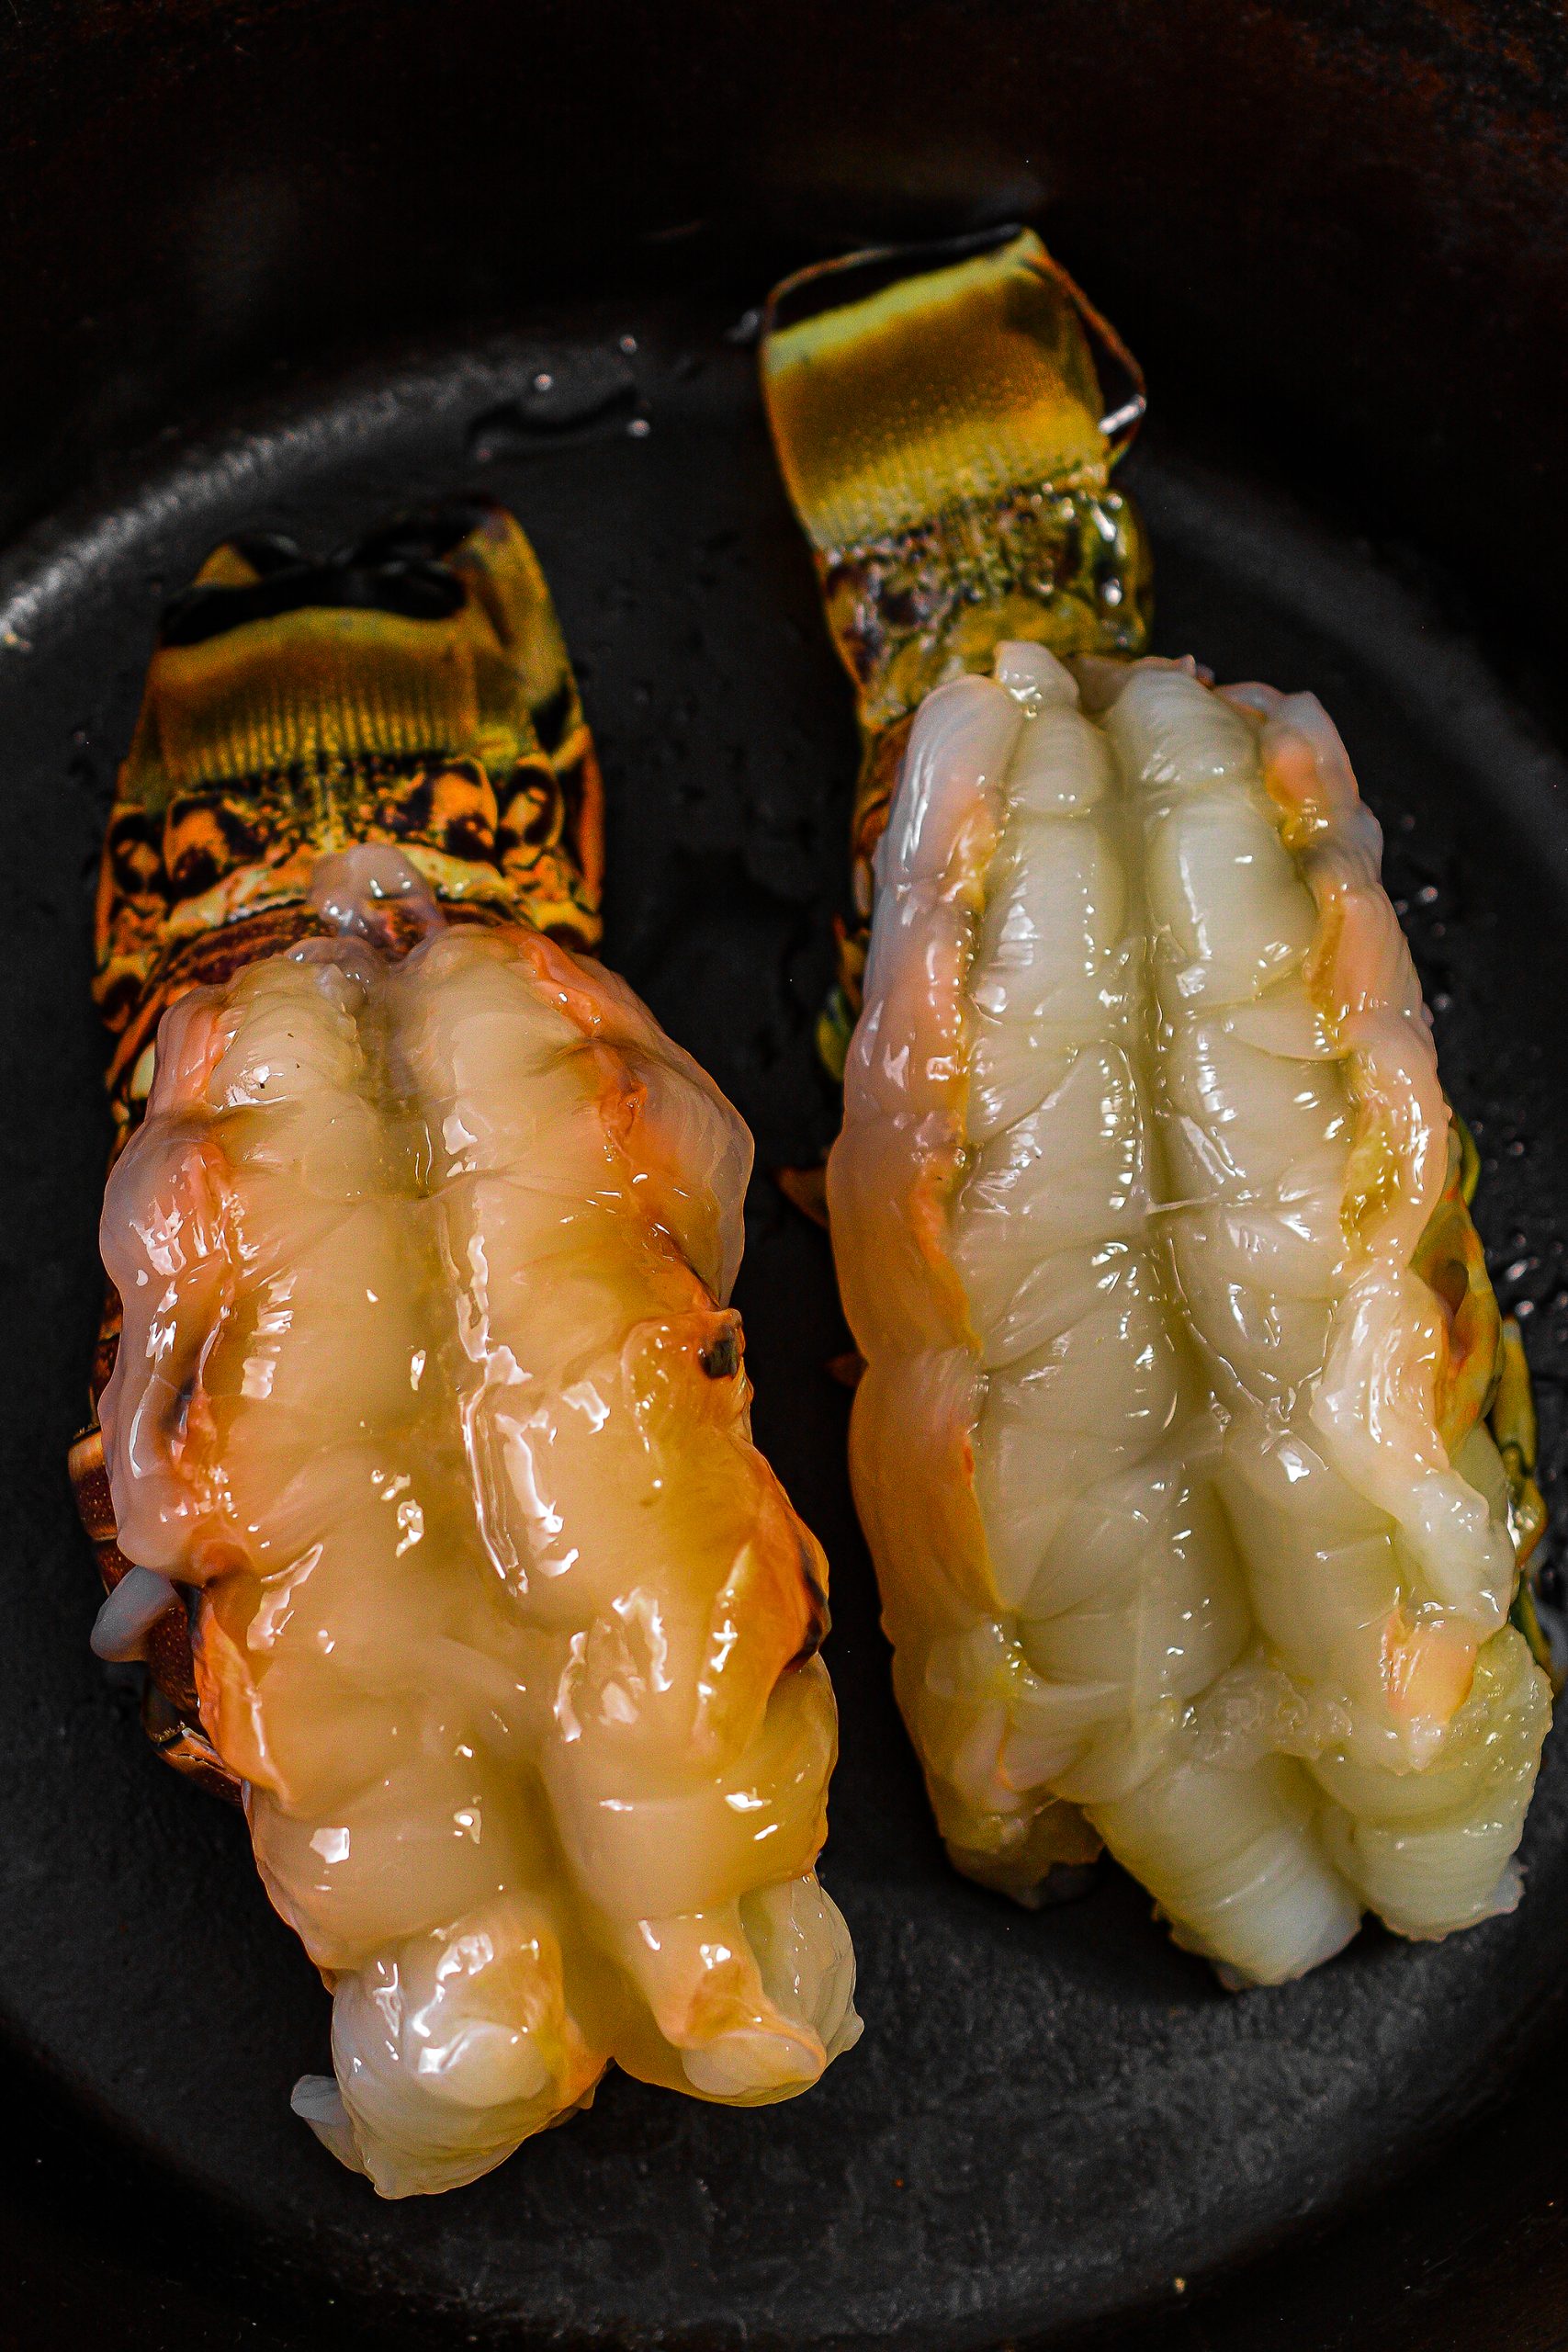 Spread the marinade over the top of each lobster tail.